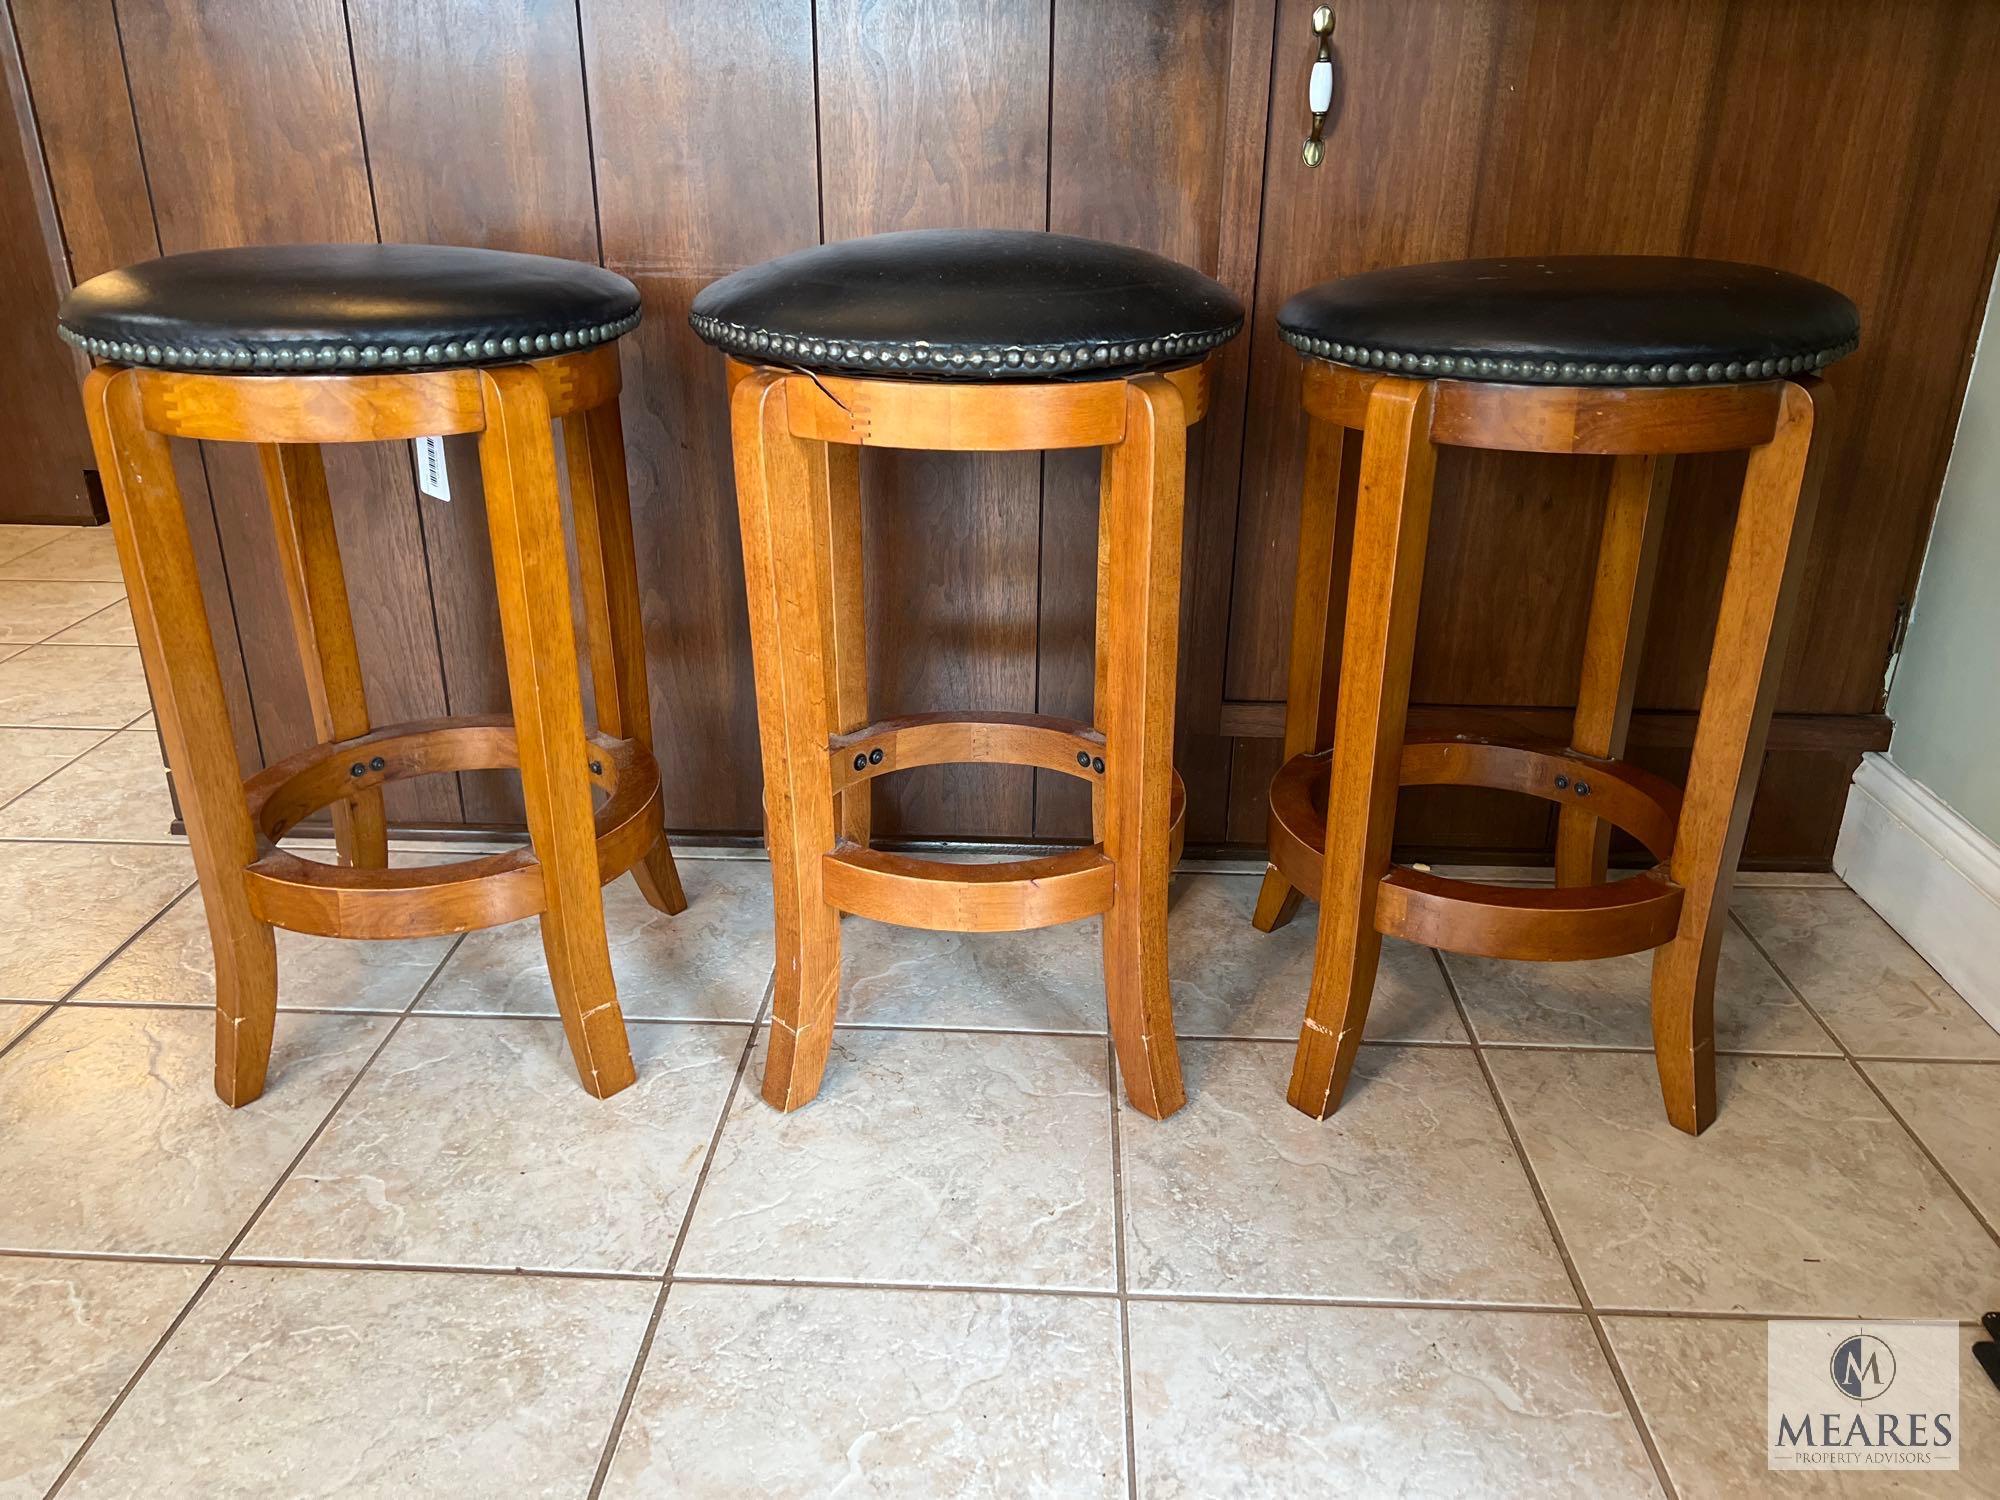 Three Swivel Top Bar Stools from Bed Bath & Beyond